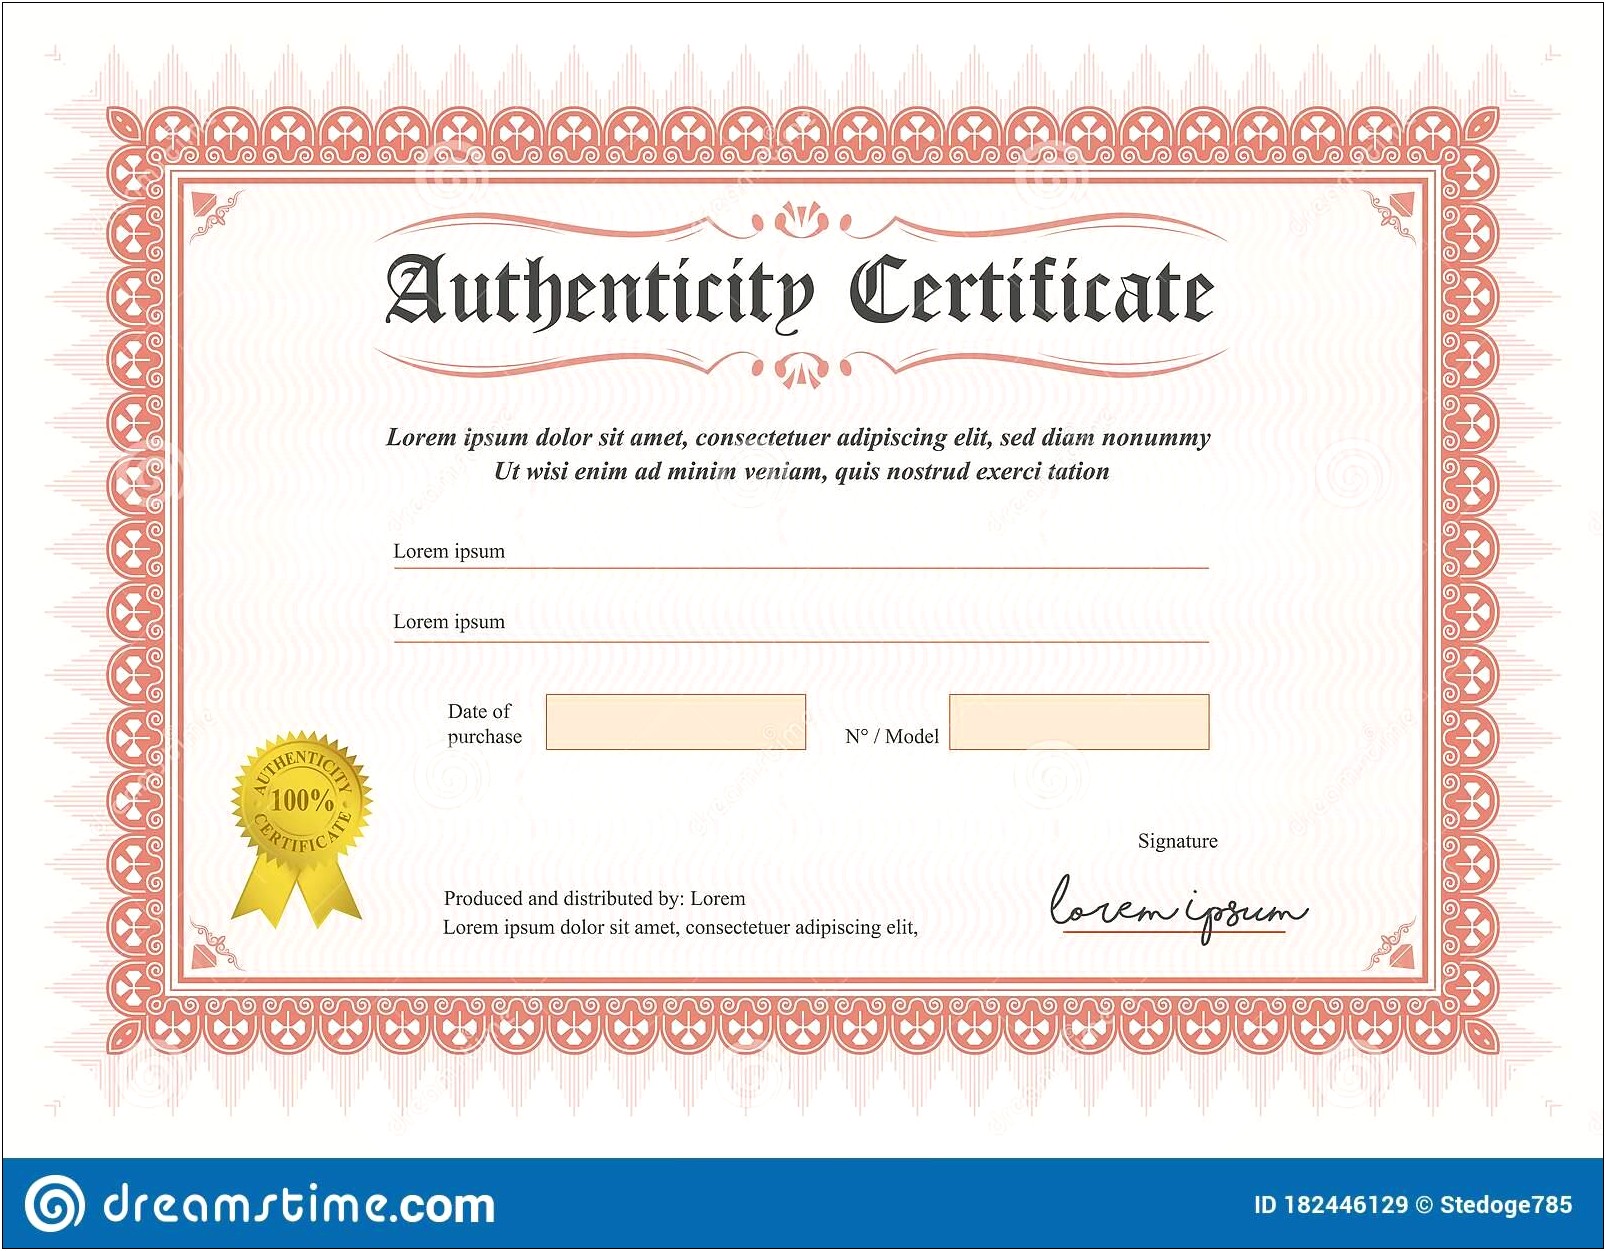 Free Art Certificate Of Authenticity Templates